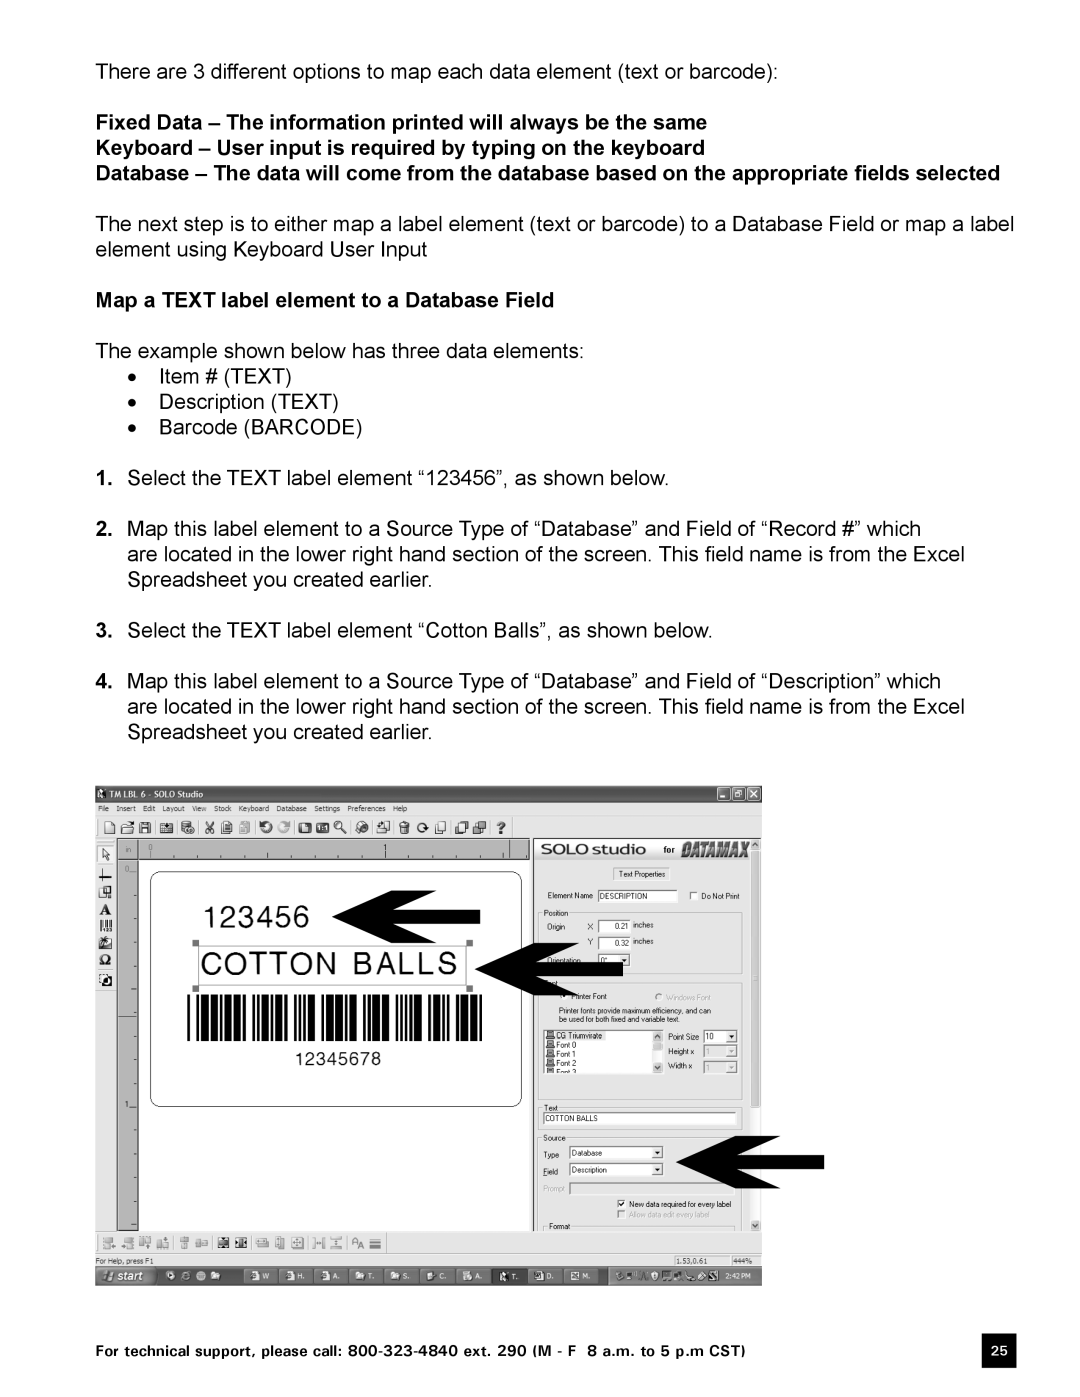 Keystone Computer Keyboard manual Fixed Data - The information printed will always be the same 